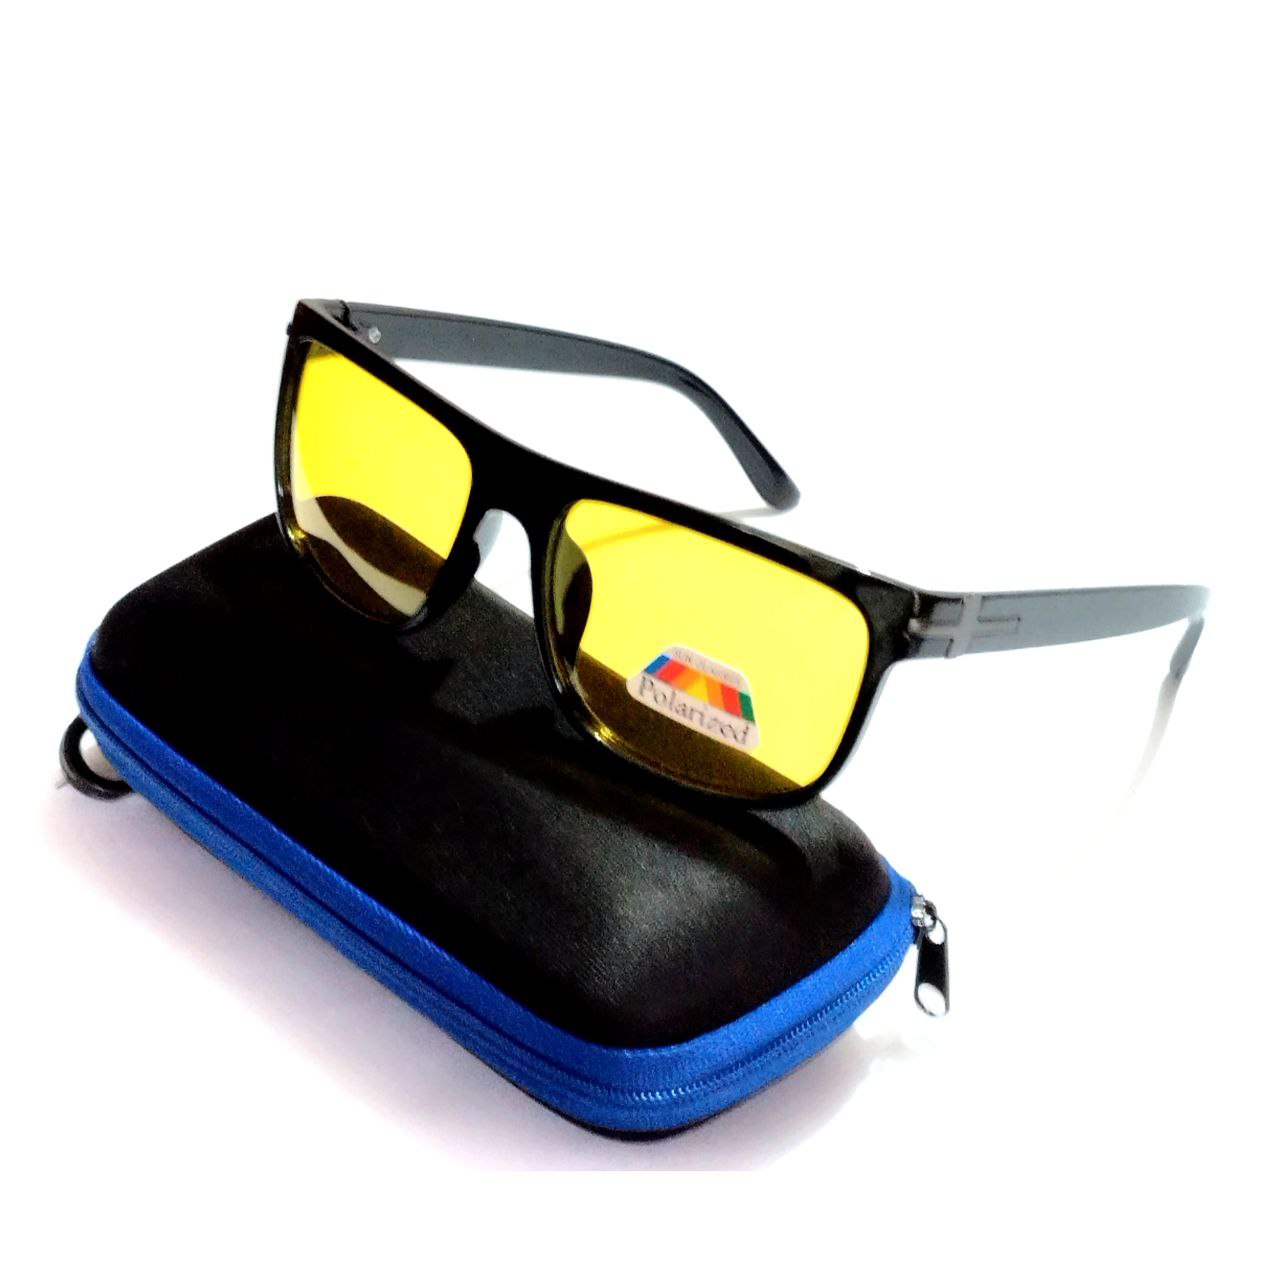 Night Vision Glasses for Car Driving in India - Yellow Polarized Lenses